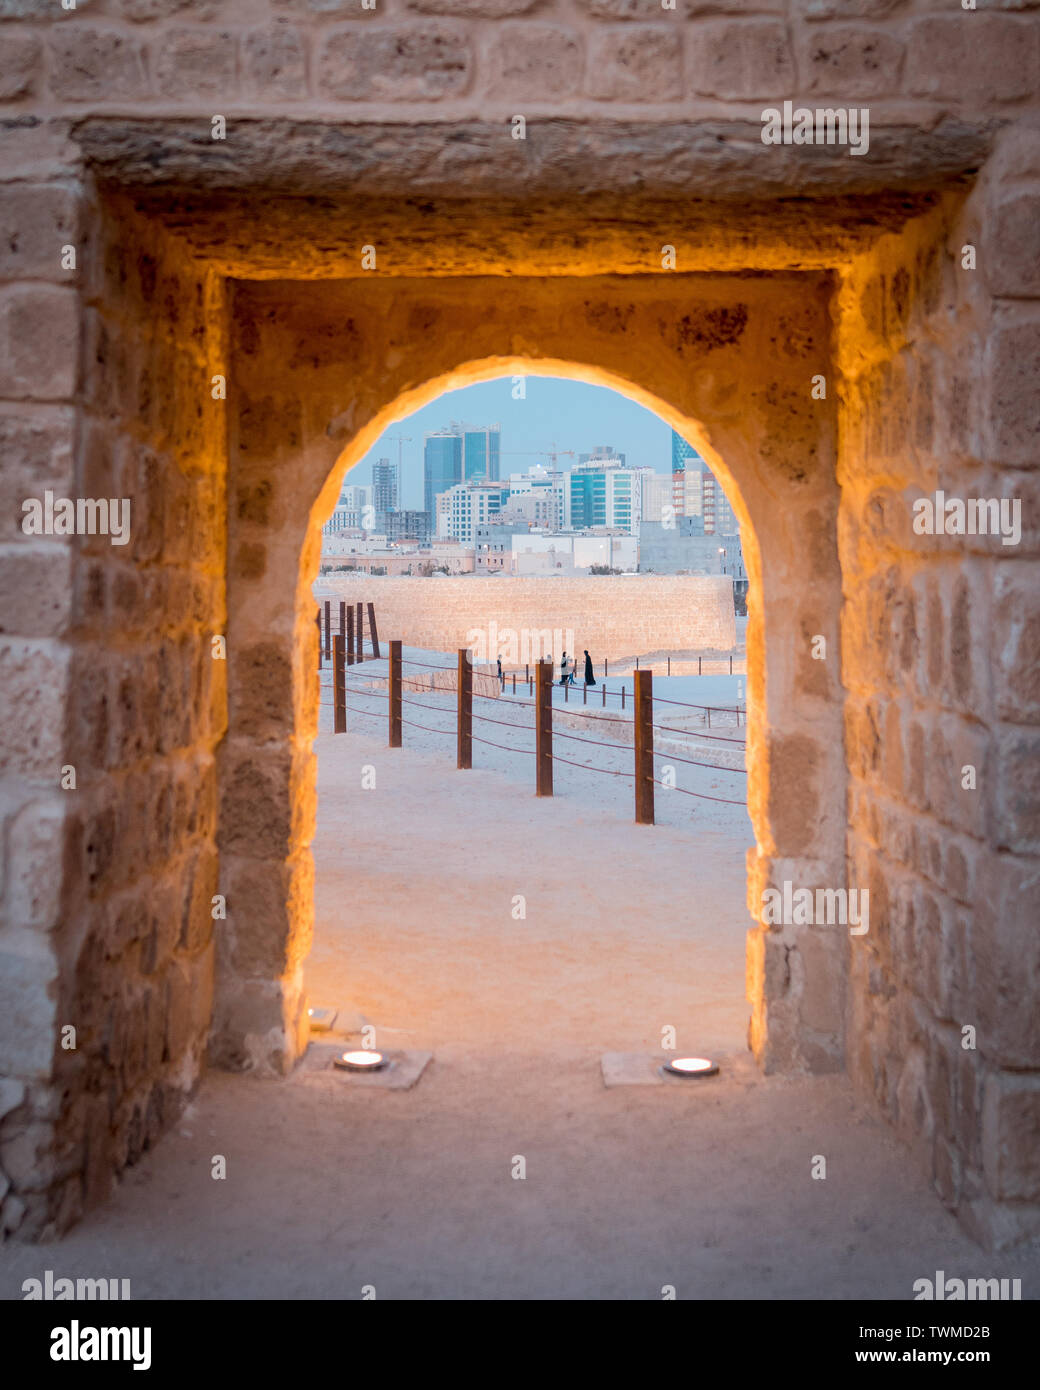 A castle stone door frame with a view of Bahrain skyline where ancient meets modern Stock Photo